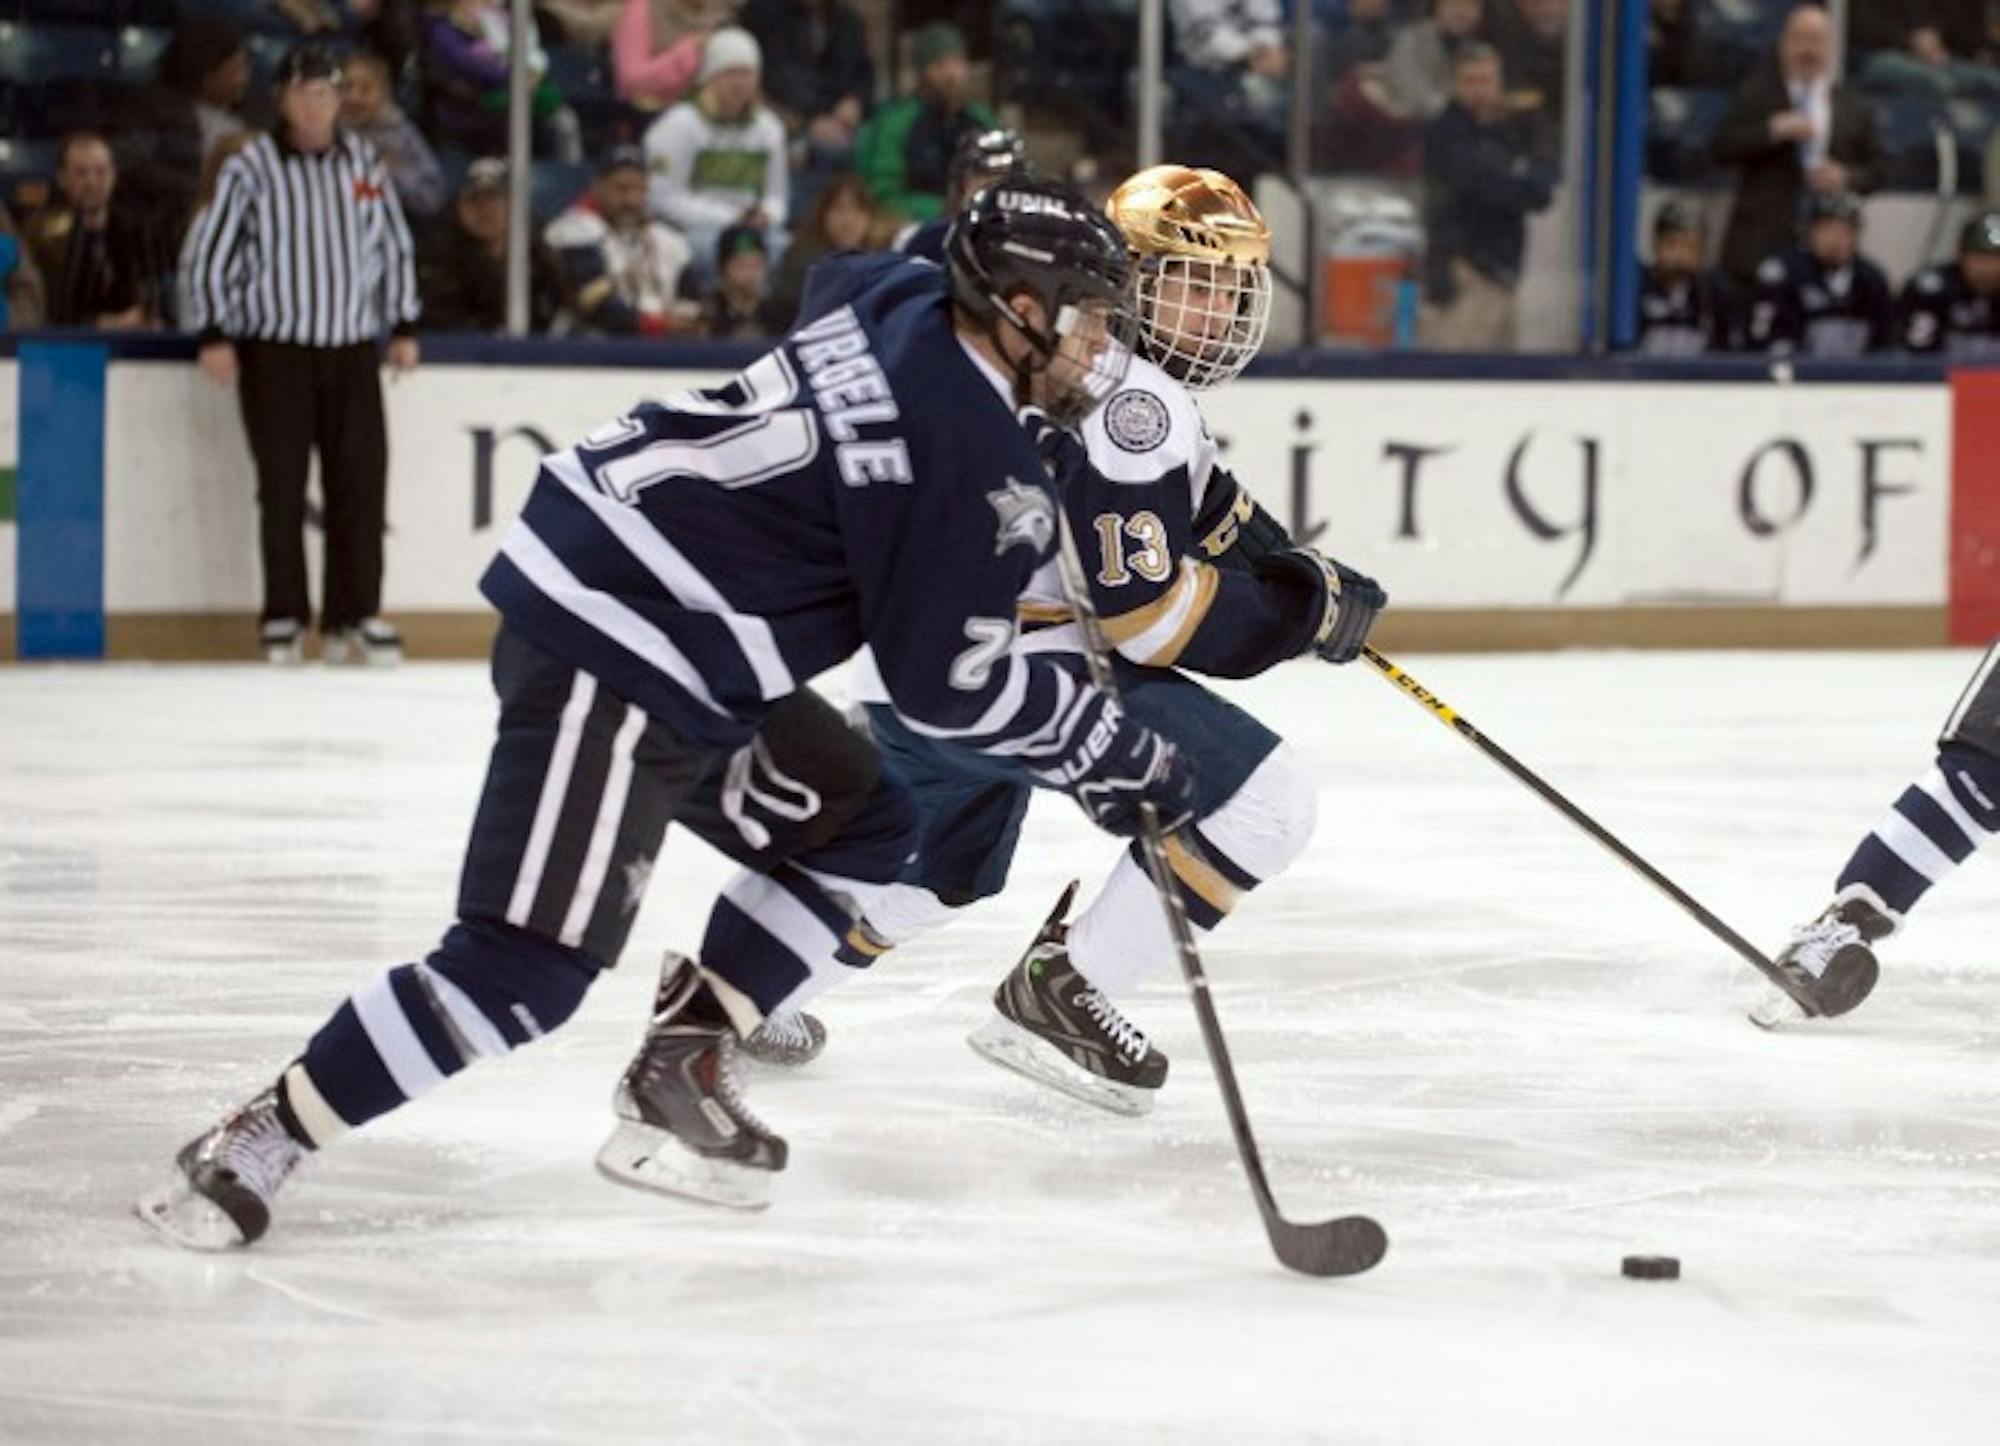 Irish sophomore center Vince Hinostroza battles for the puck during Notre Dame’s 5-2 loss to New Hampshire on Friday.